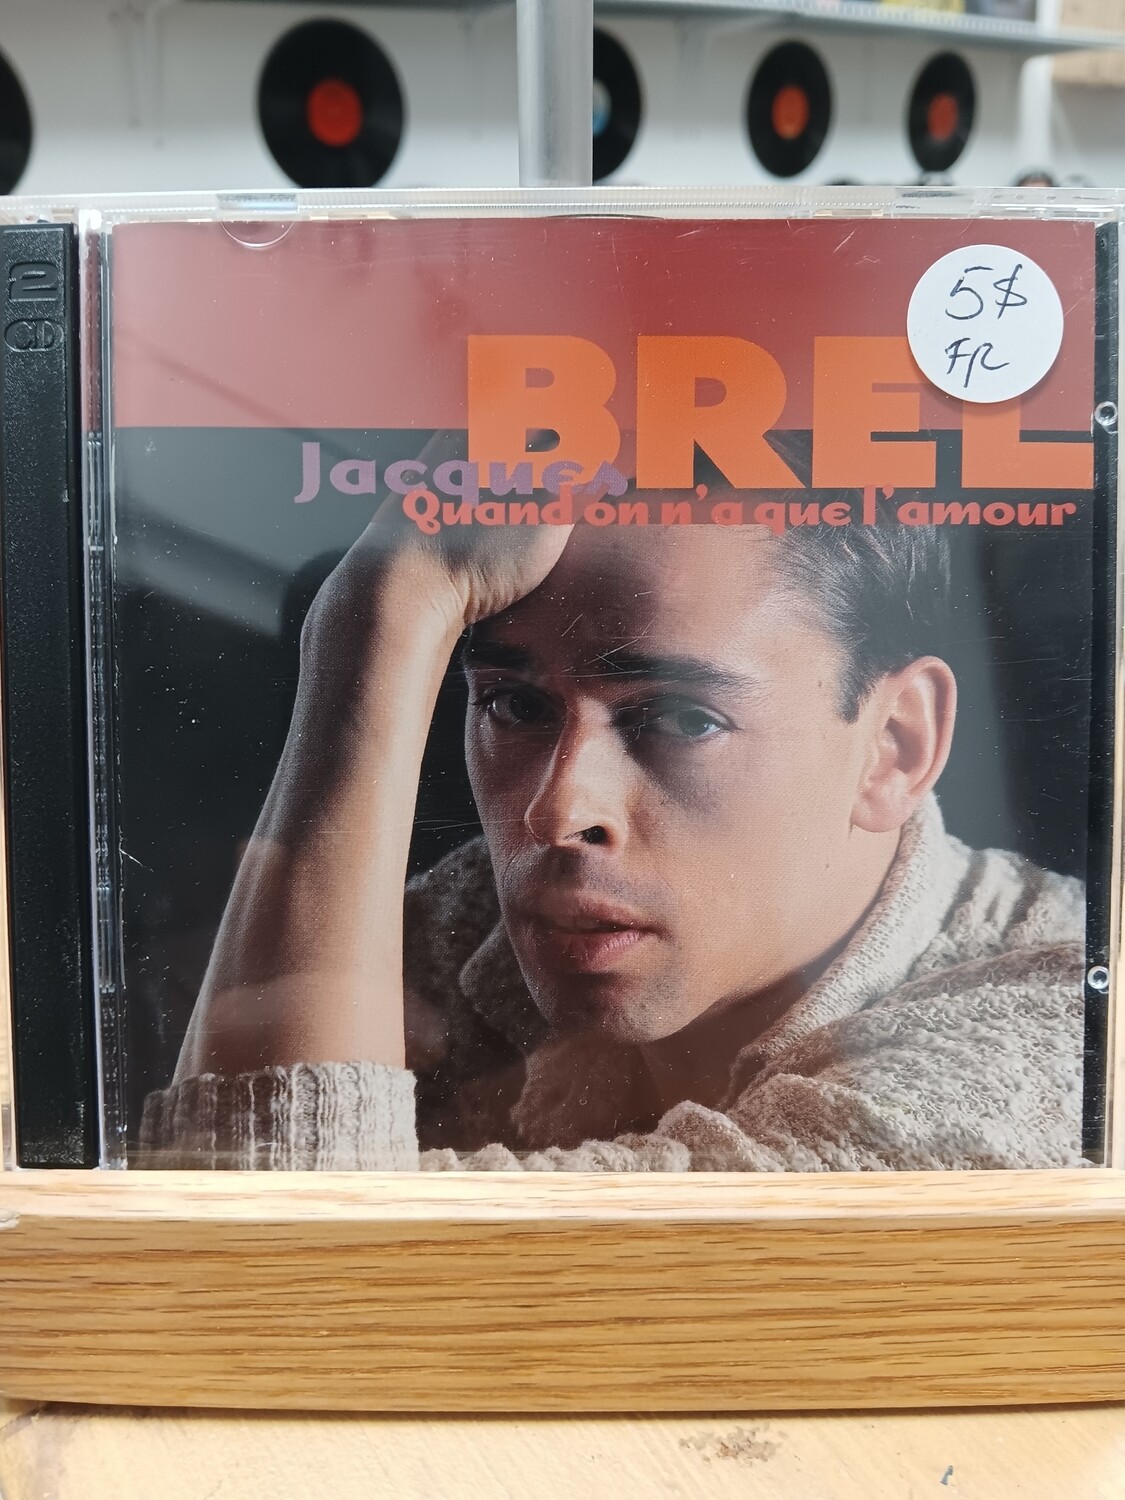 Jacques Brel - Quand on n'a que l'amour (CD)